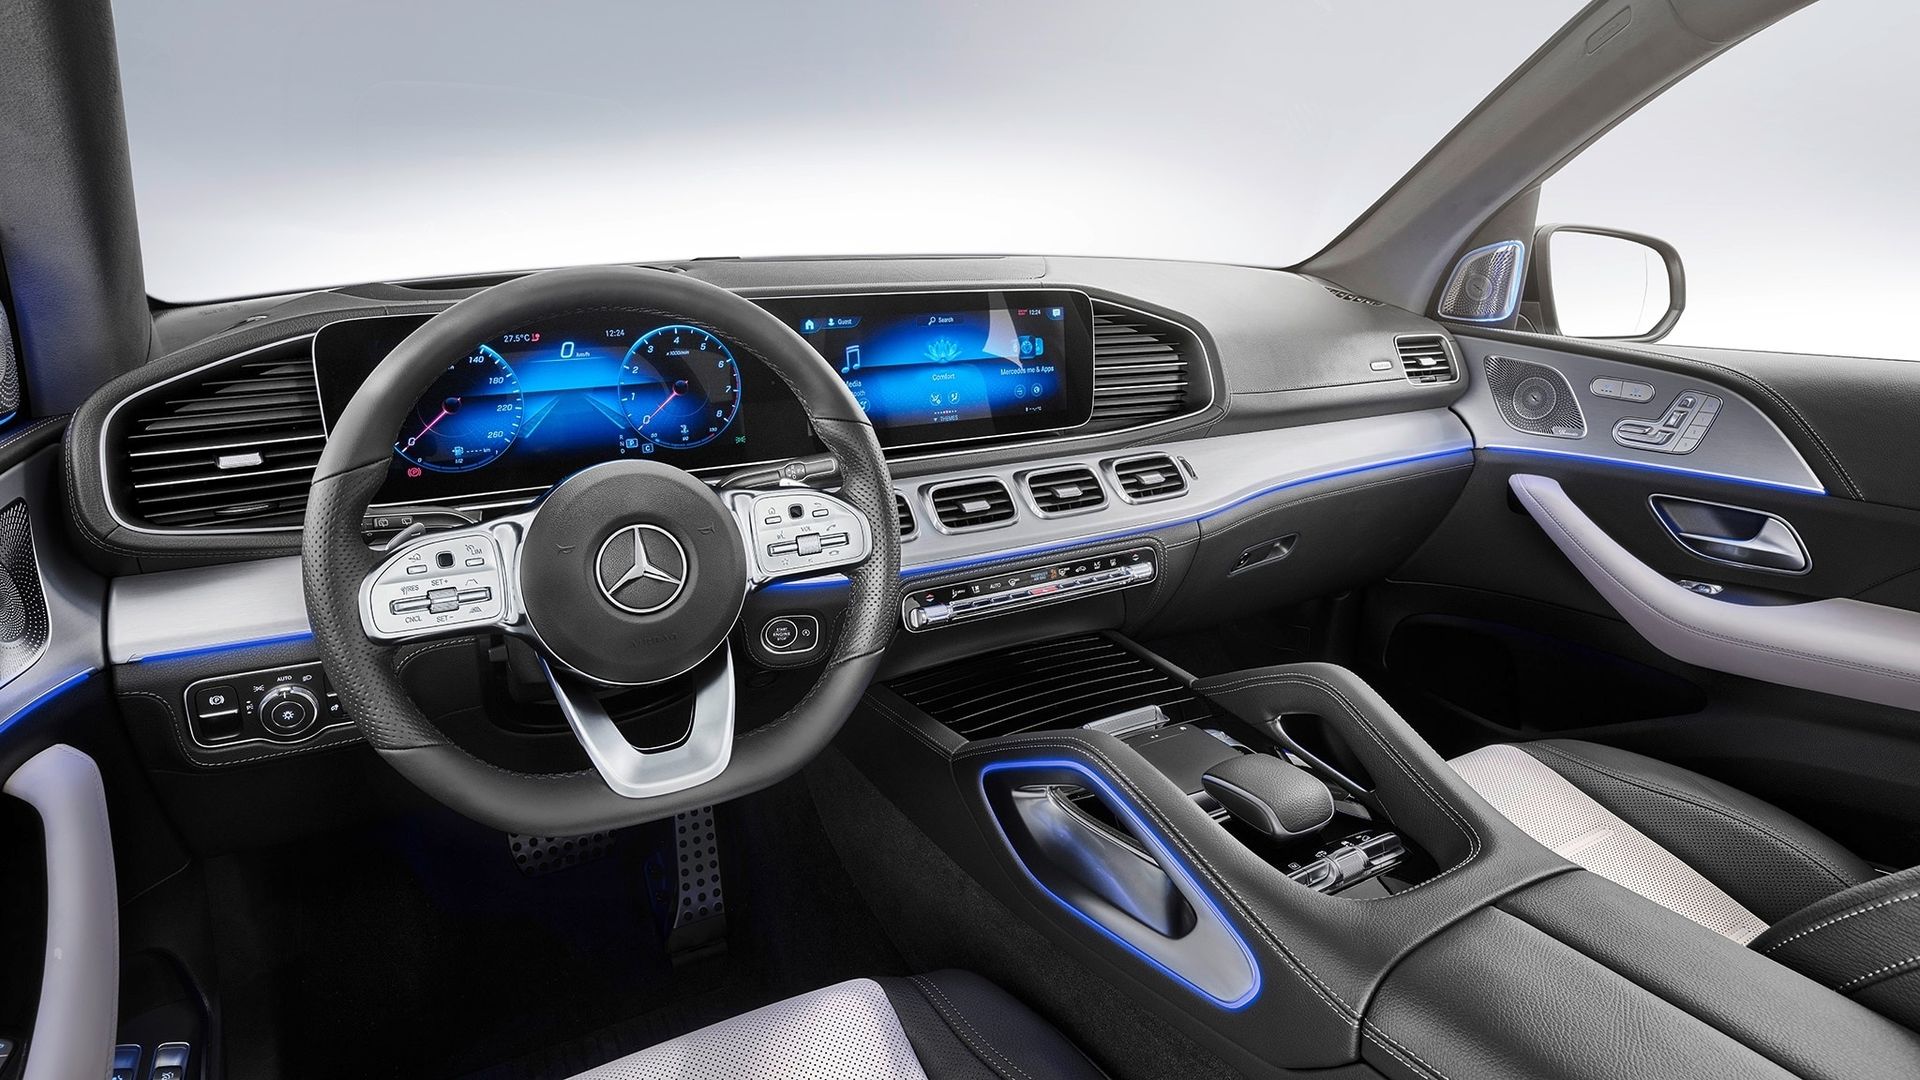 This image is the interior of the 2020 Mercedes, from the view of the driver's seat. The interior is largely black leather.